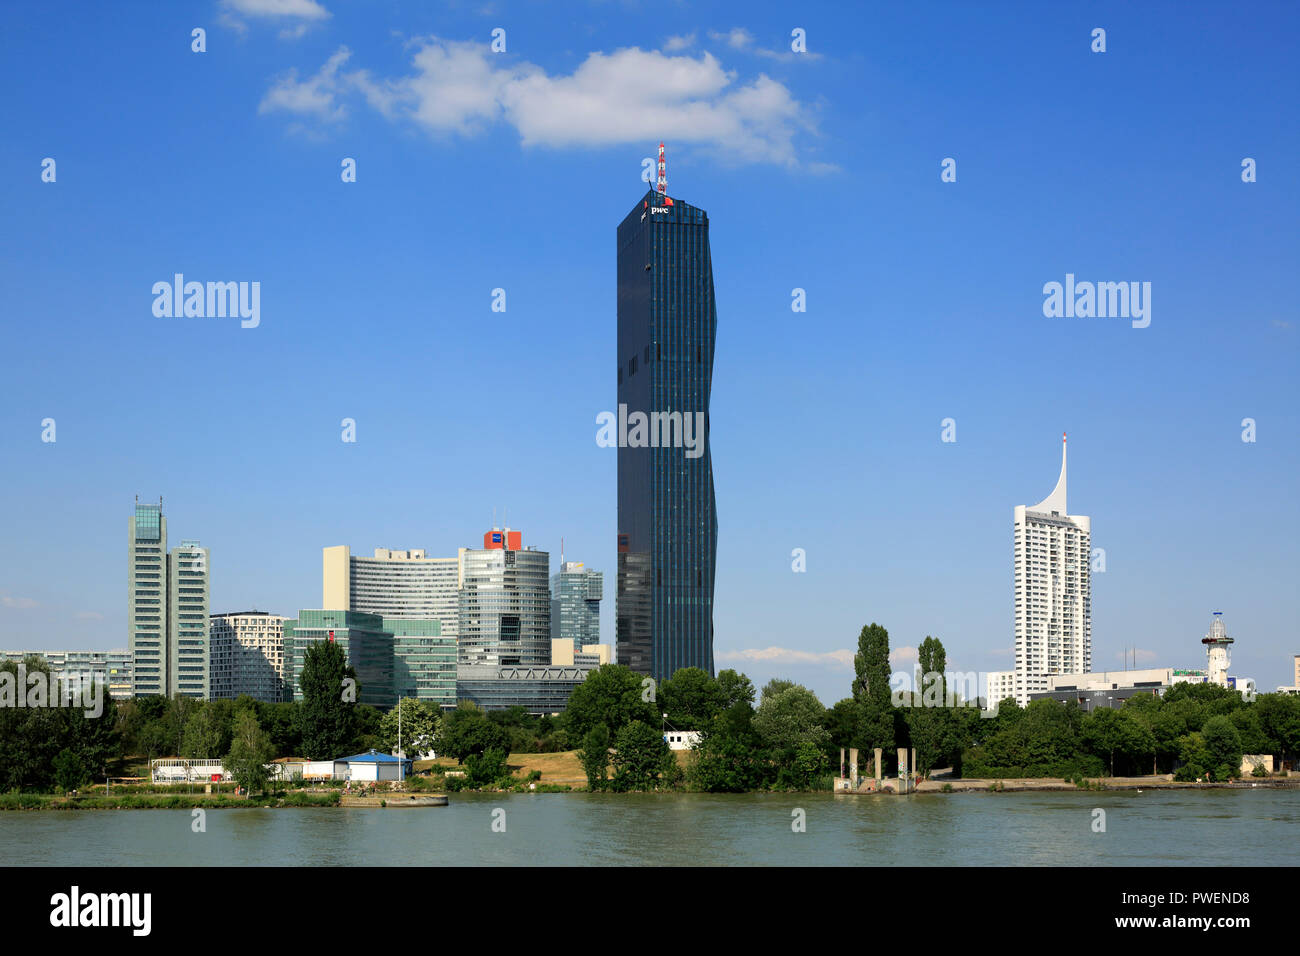 Austria, A-Vienna, Danube, Federal Capital, skyline of the Donau City, f.l.t.r. Ares Tower, Commercial Tower, UNO City with VIC Vienna International Centre and Austria Center Vienna, conference center, IZD Tower, Commercial Tower, DC Tower 1, Commercial Tower, skyscraper, highrise Neue Donau, apartment tower, river landscape, Danube landscape, Danube promenade, Danube bank, cumulus clouds Stock Photo